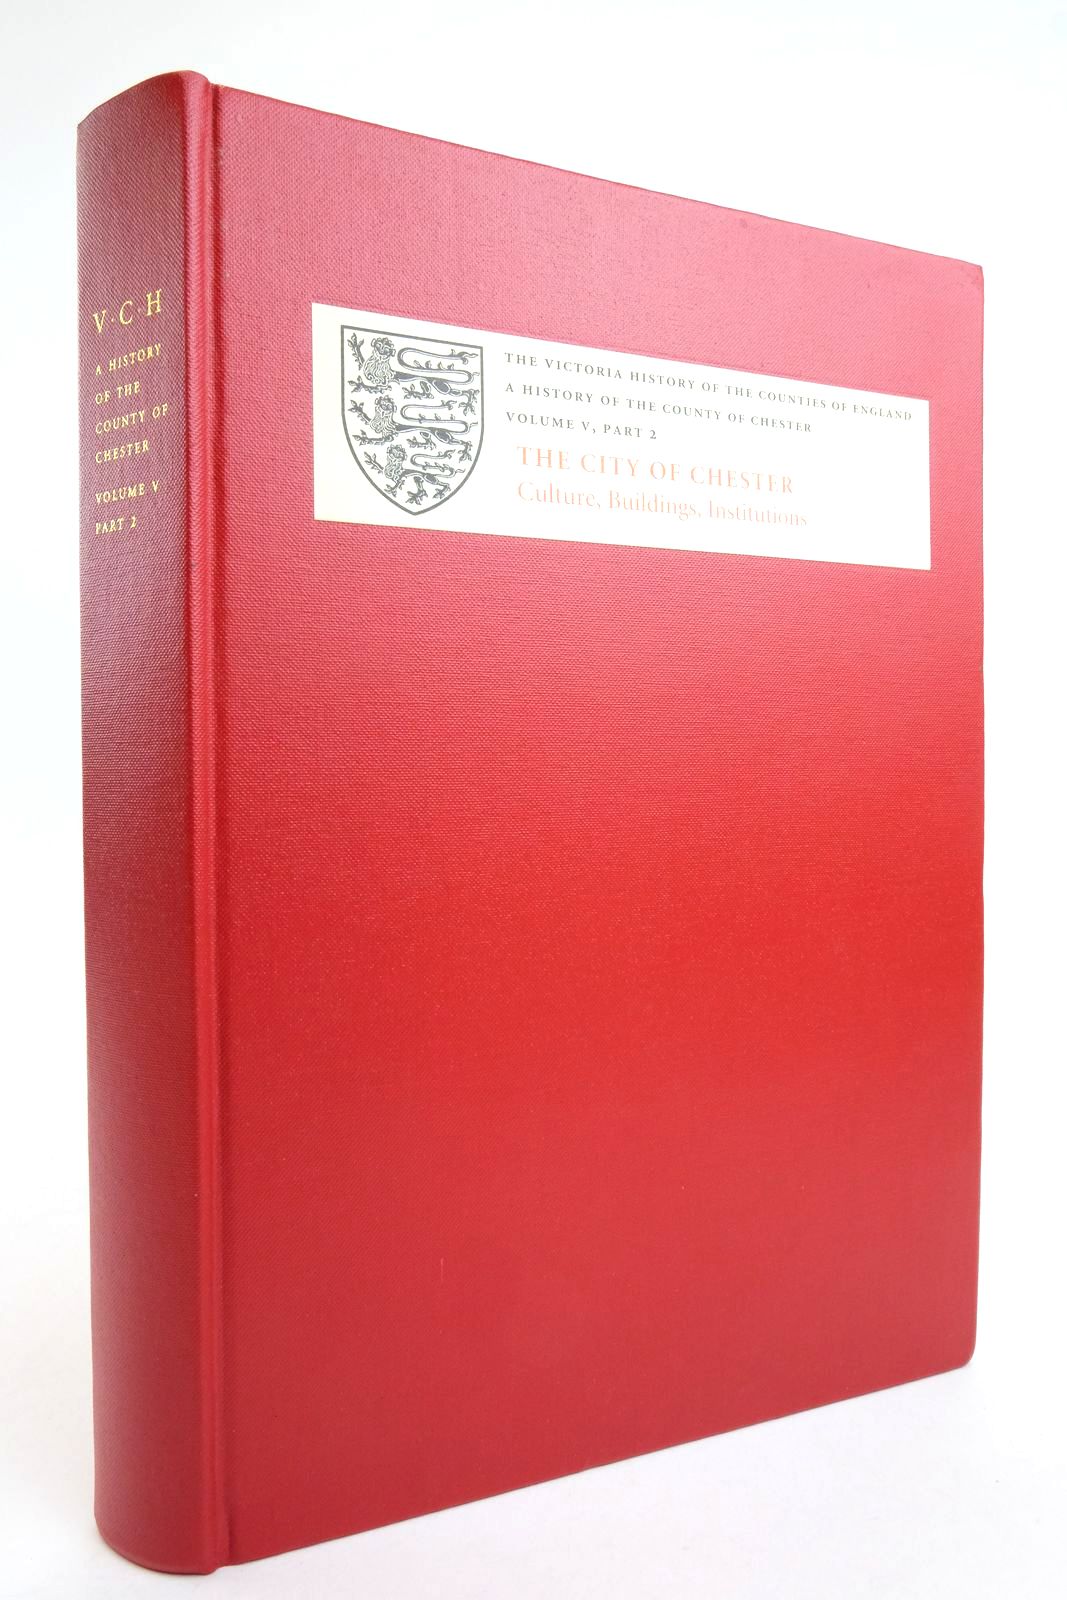 Photo of A HISTORY OF THE COUNTY OF CHESTER: VOLUME V, PART 2 THE CITY OF CHESTER: CULTURE, BUILDINGS, INSTITUTIONS- Stock Number: 2136483